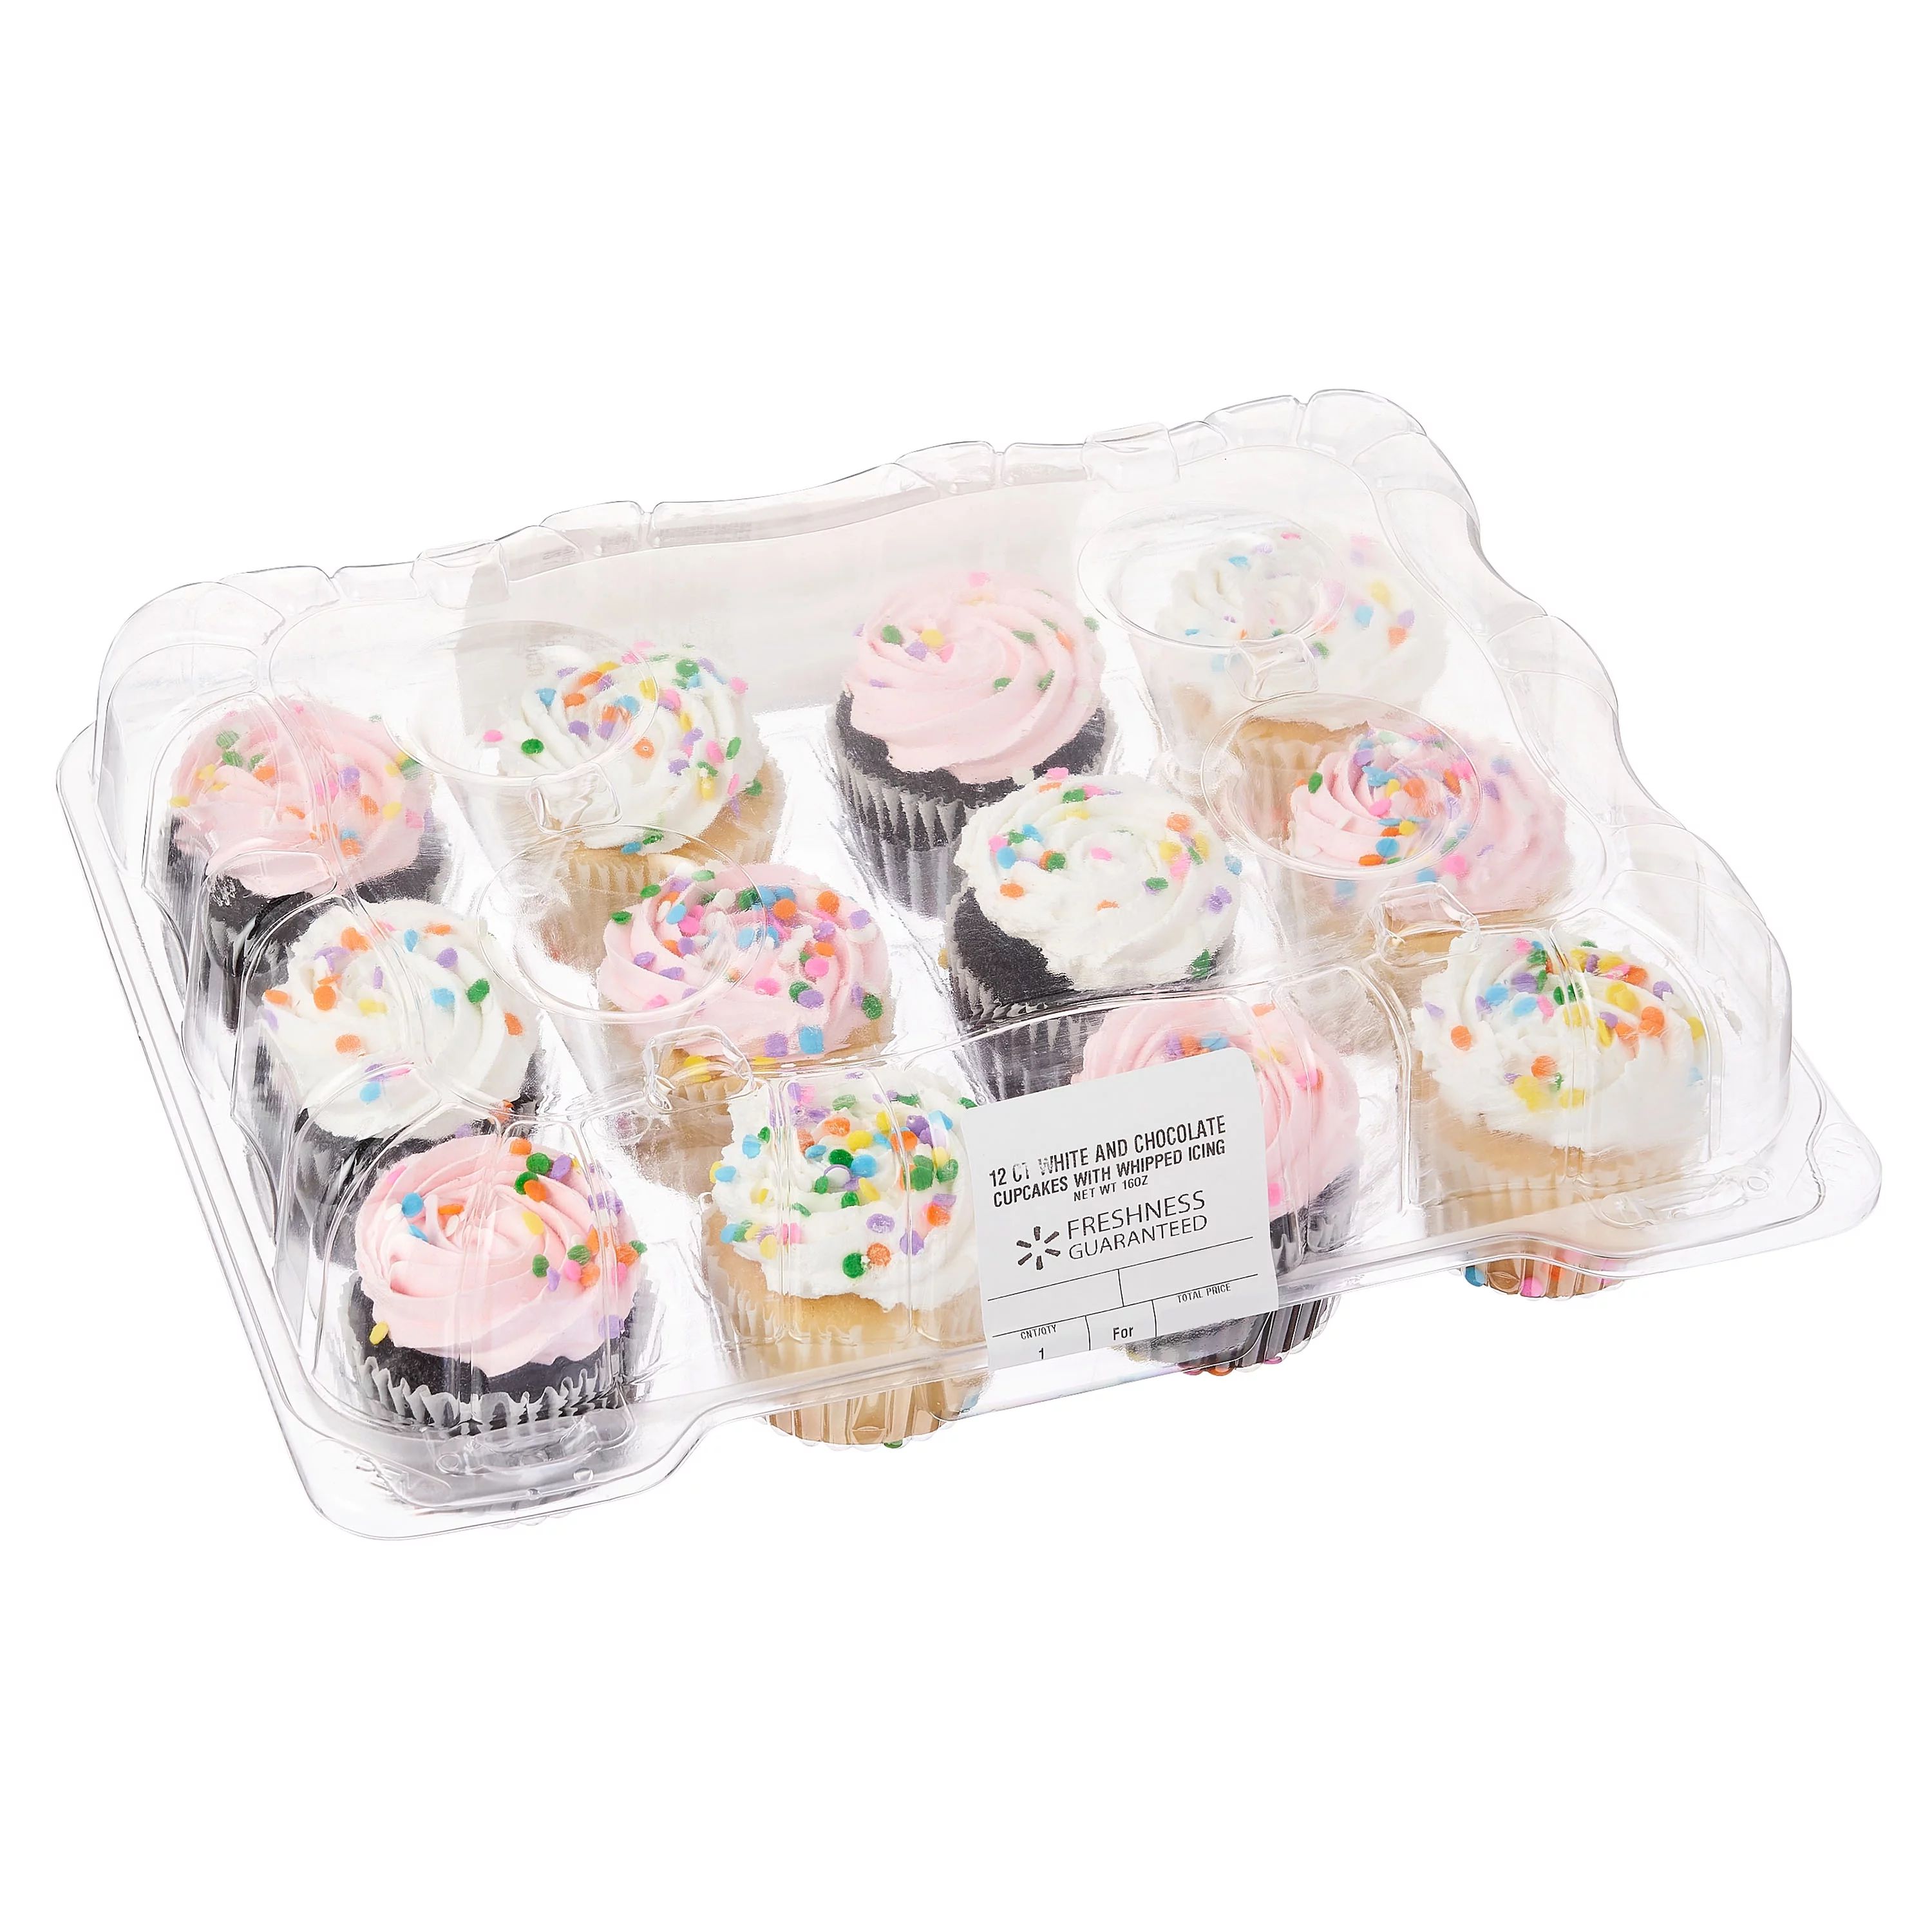 Freshness Guaranteed Special Order Assorted Cupcakes with Whipped Icing, 12 Count | Walmart (US)